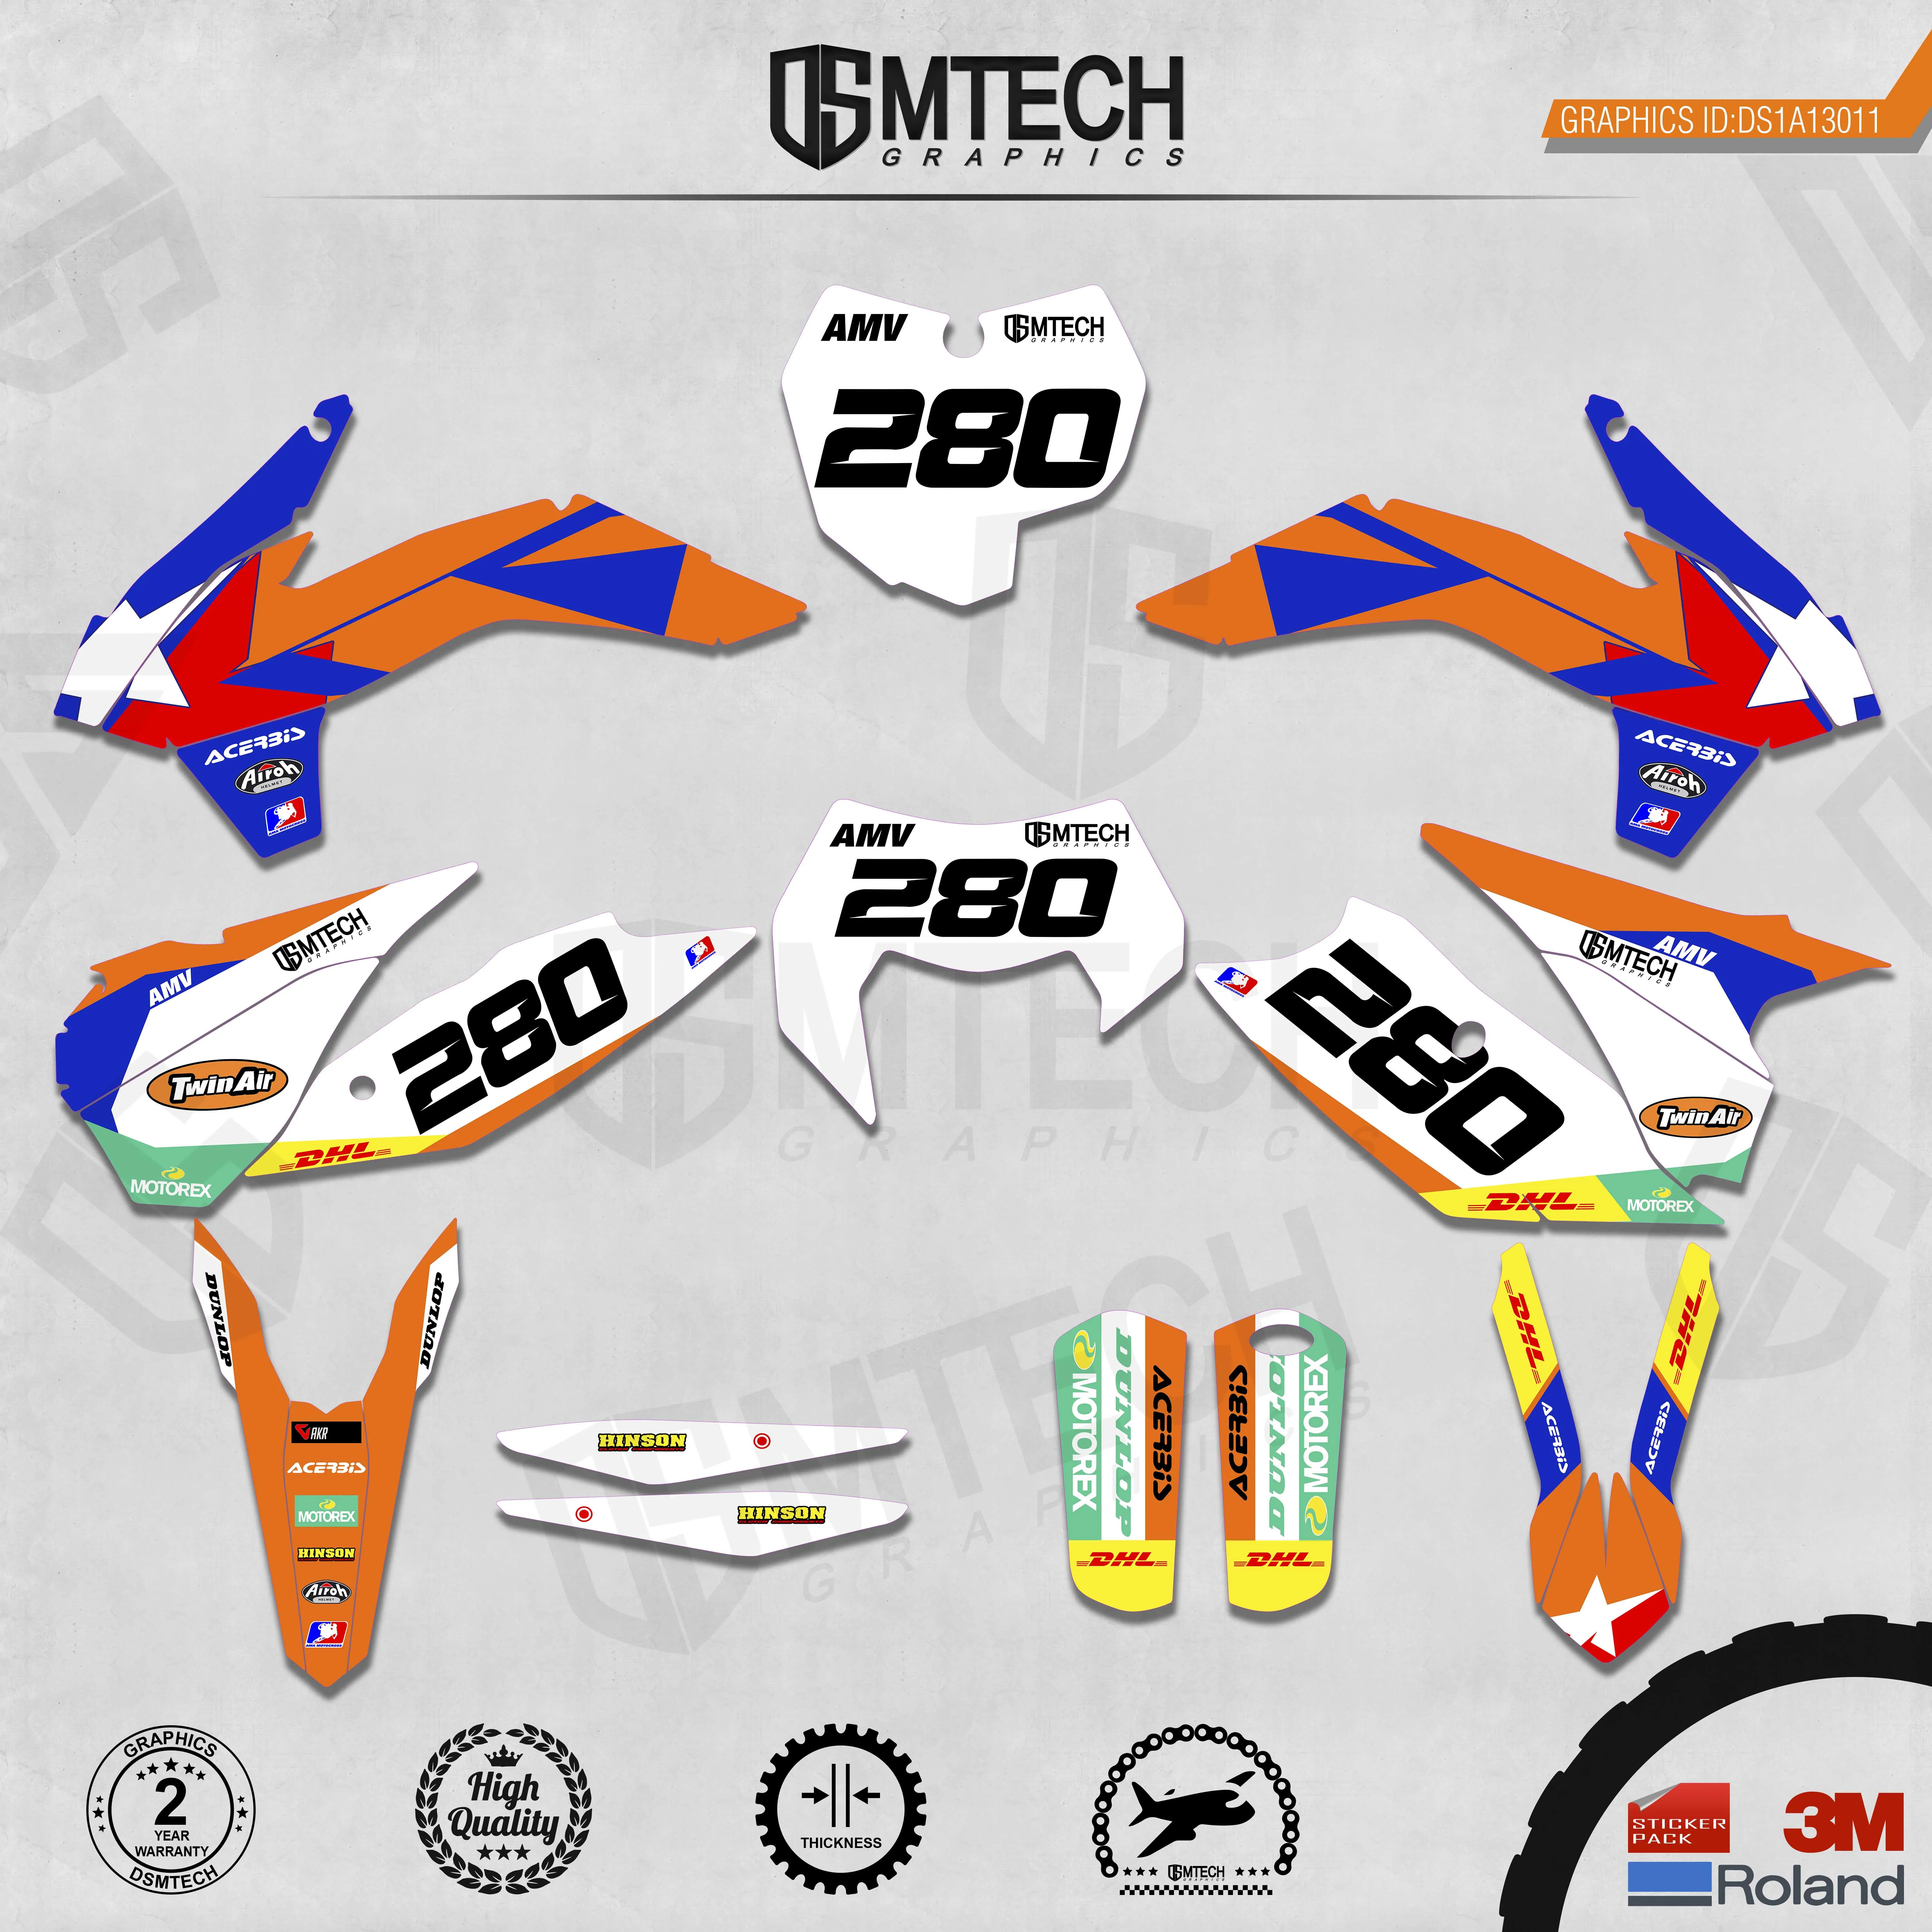 DSMTECH Customized Team Graphics Backgrounds Decals 3M Custom Stickers For 2013-2014 SXF 2015 SXF 2014-2015 EXC 2016 EXC  011